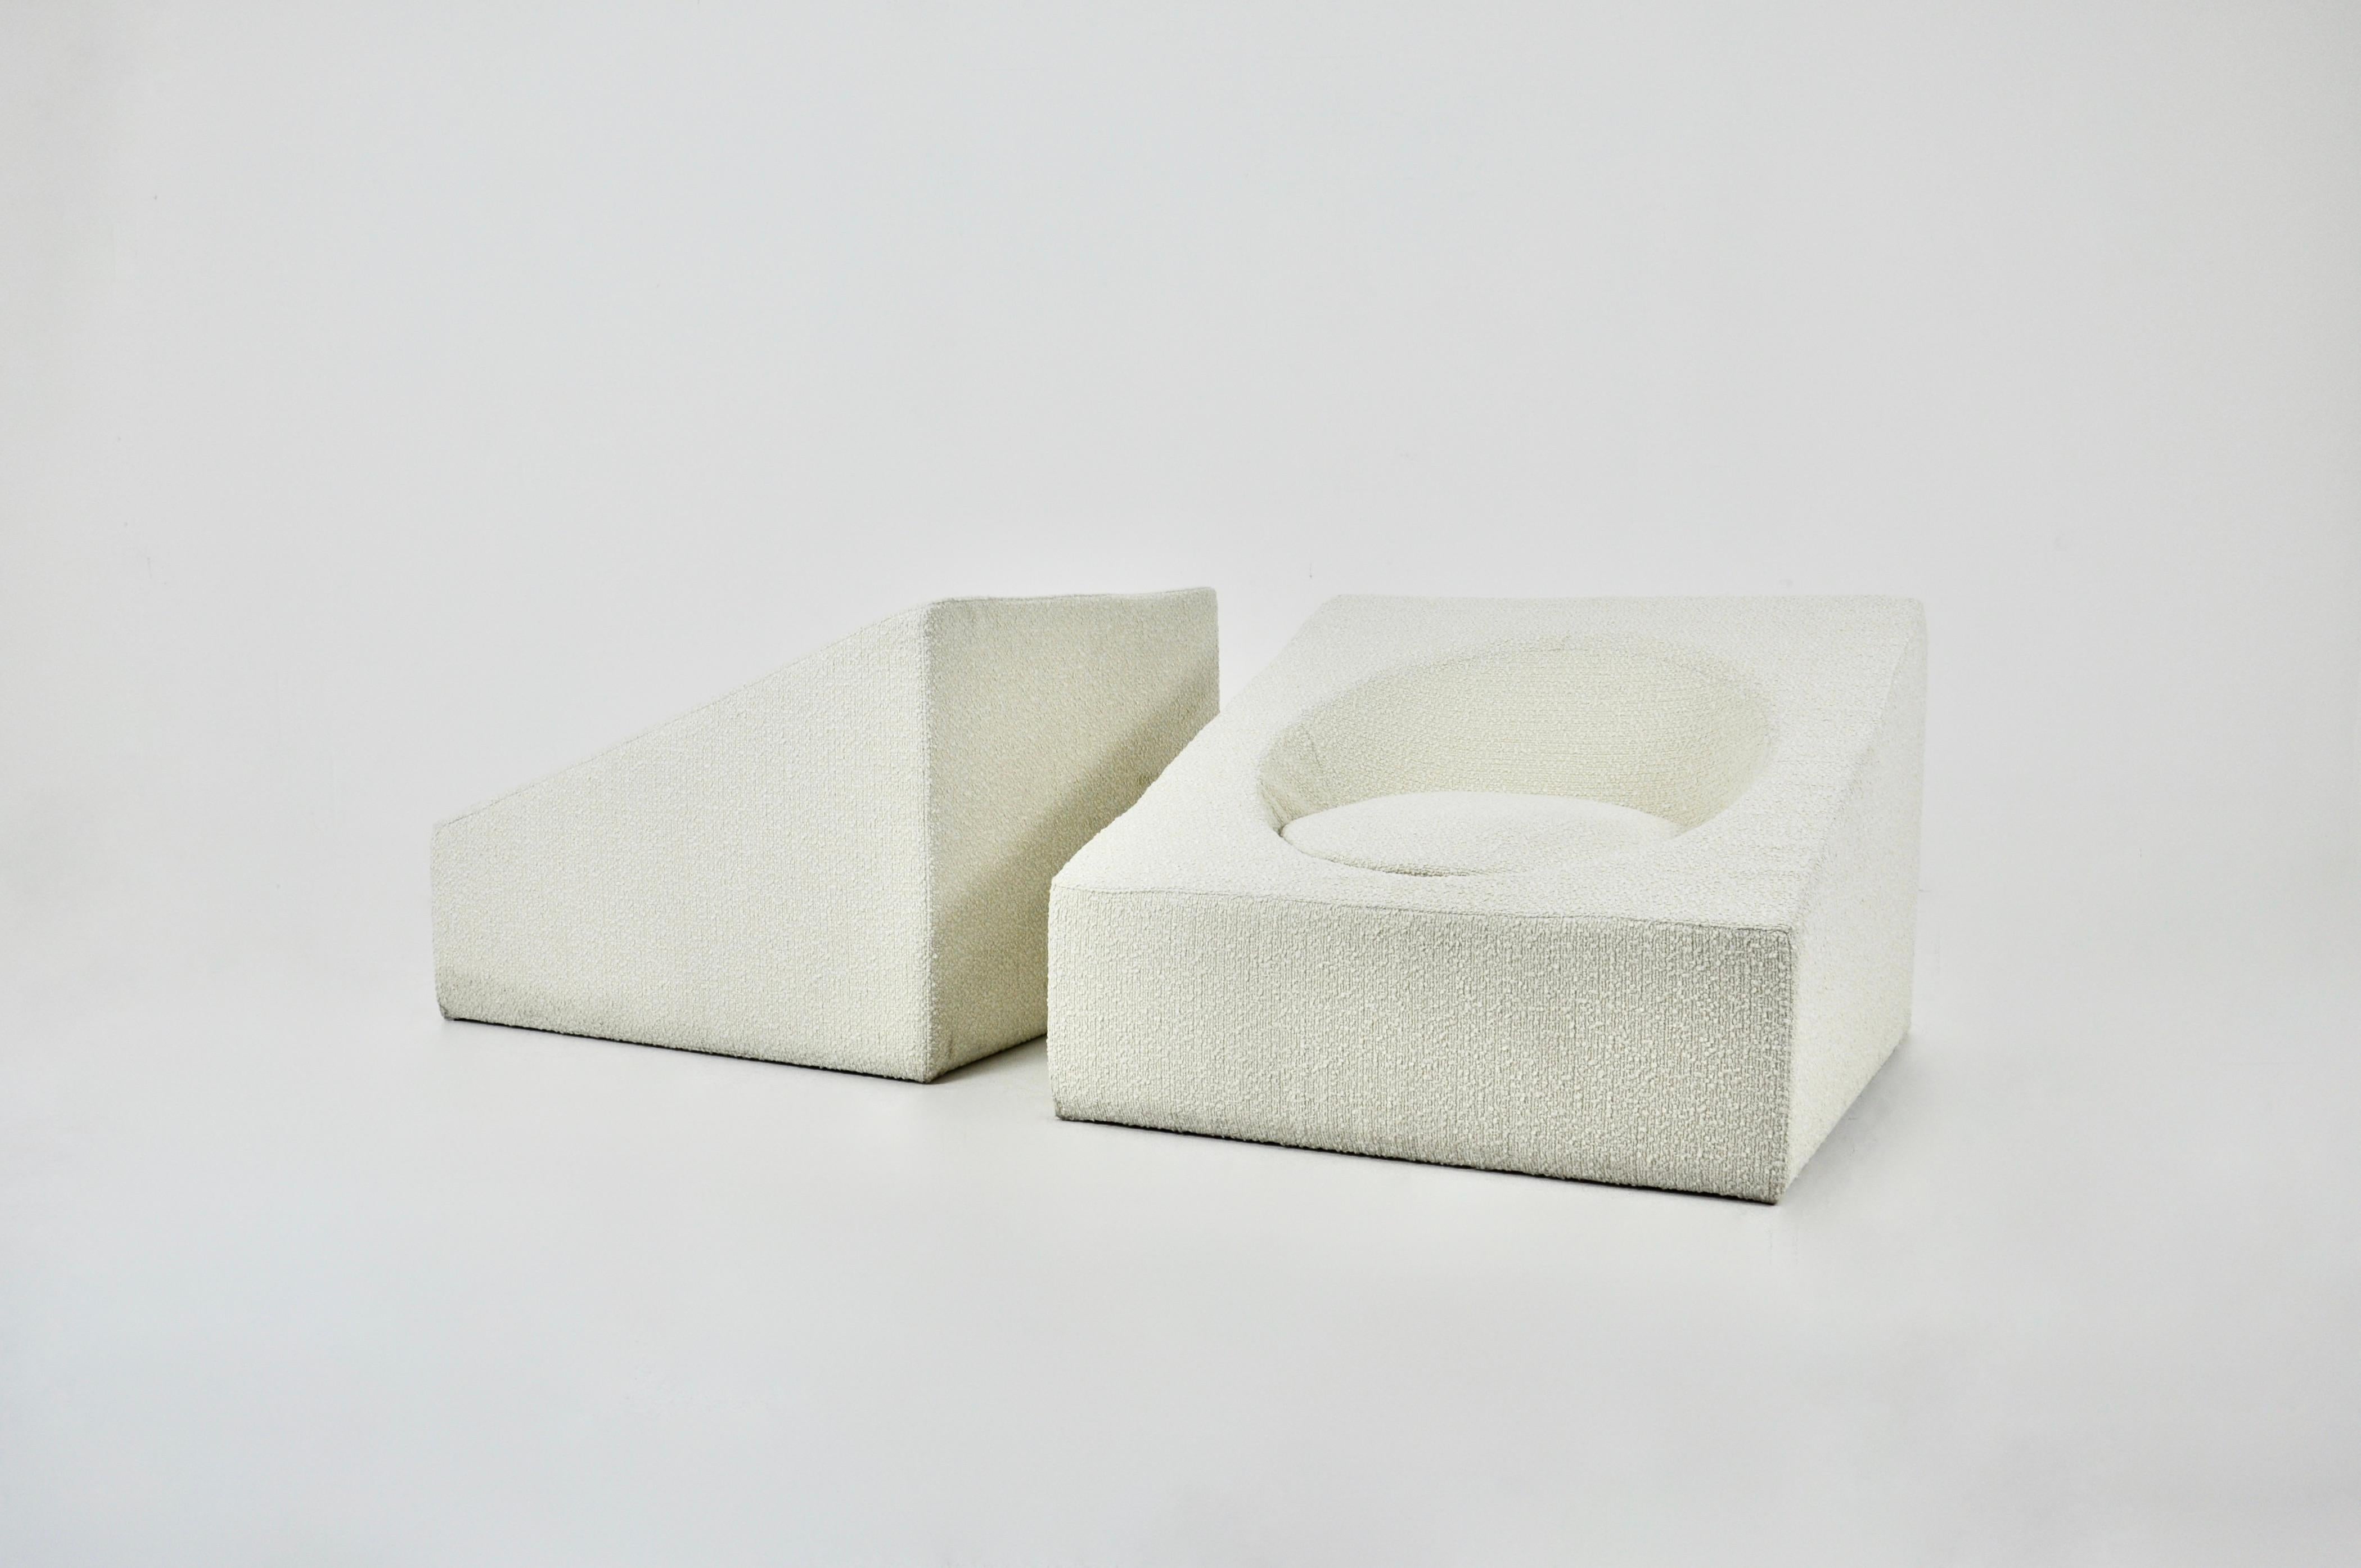 Pair of Italian armchairs in white curly fabric, very comfortable. Seat height: 31 cm Wear due to time and age of the chairs.